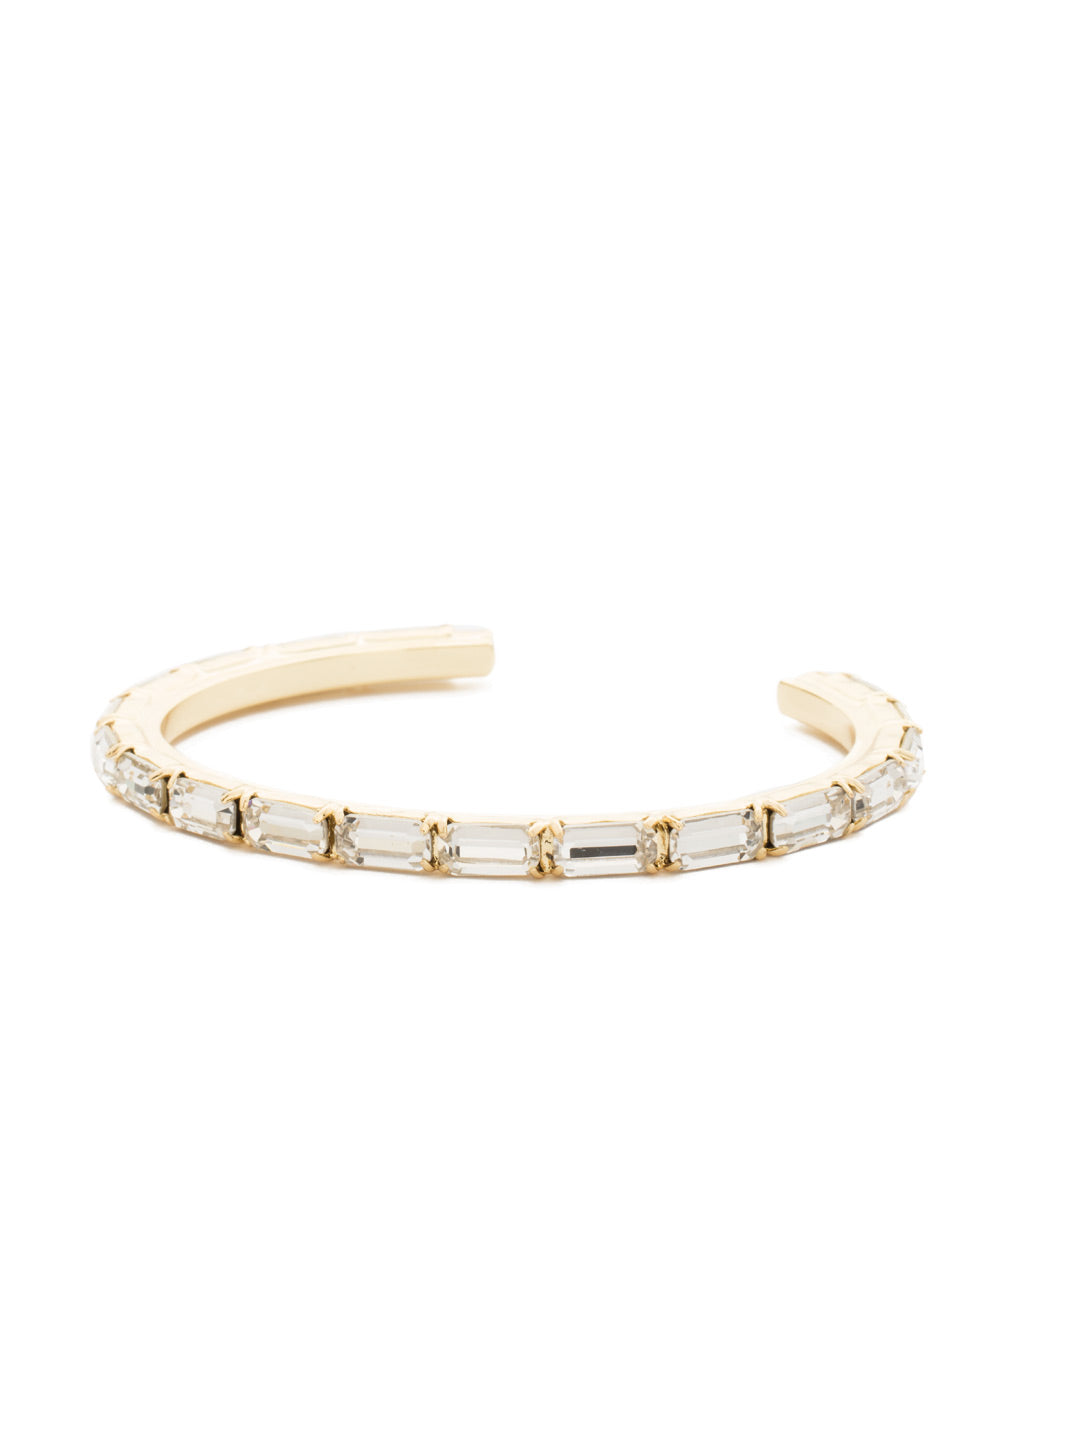 Brilliant Baguette Cuff Bracelet - BDK49BGCRY - <p>This cuff bracelet features repeating crystal baguettes and can be mixed and matched in a myriad of ways. From Sorrelli's Crystal collection in our Bright Gold-tone finish.</p>